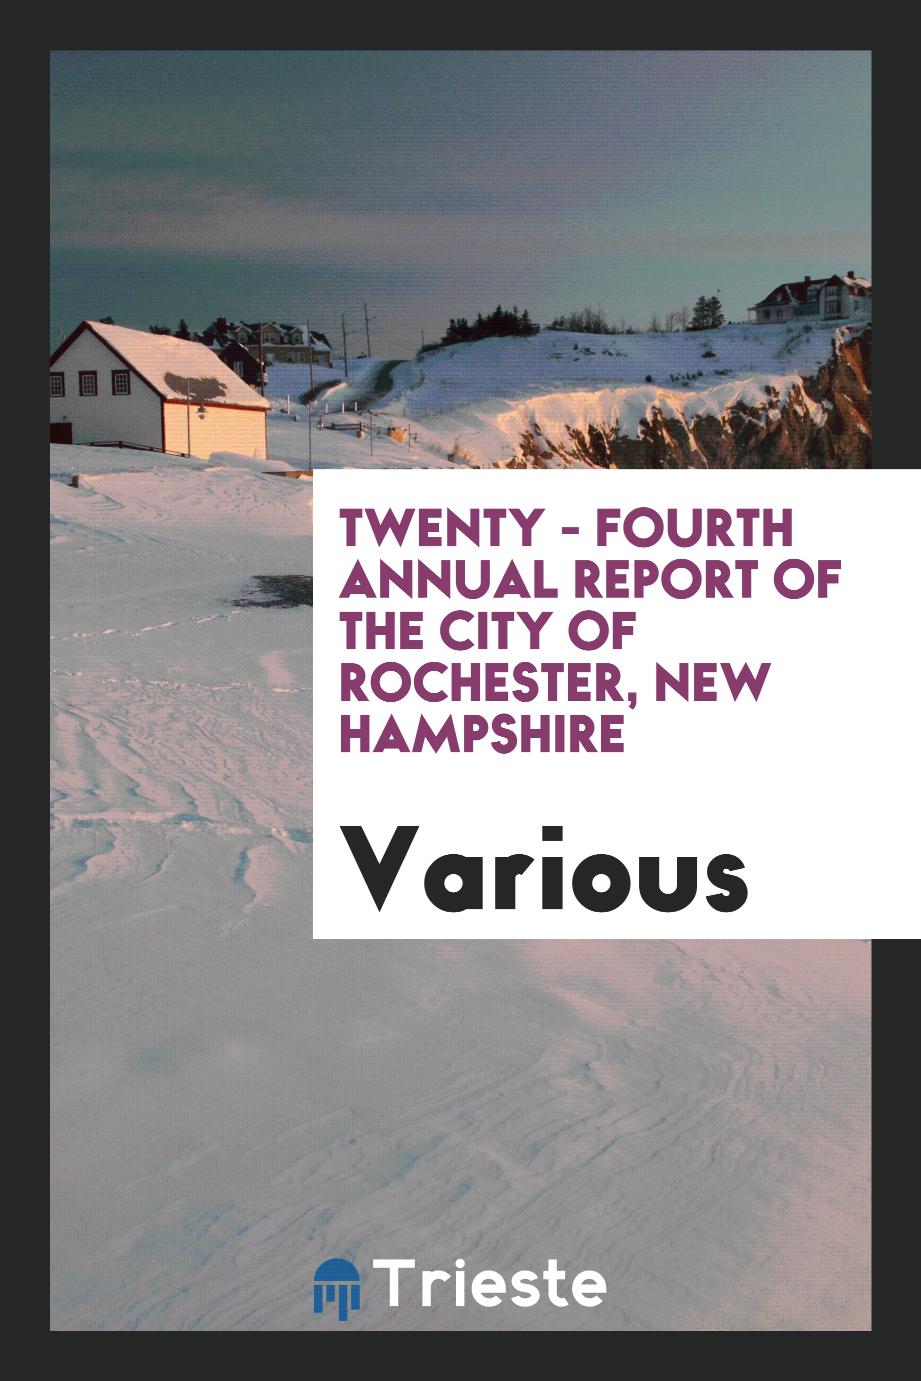 Twenty - fourth Annual report of the city of Rochester, New Hampshire